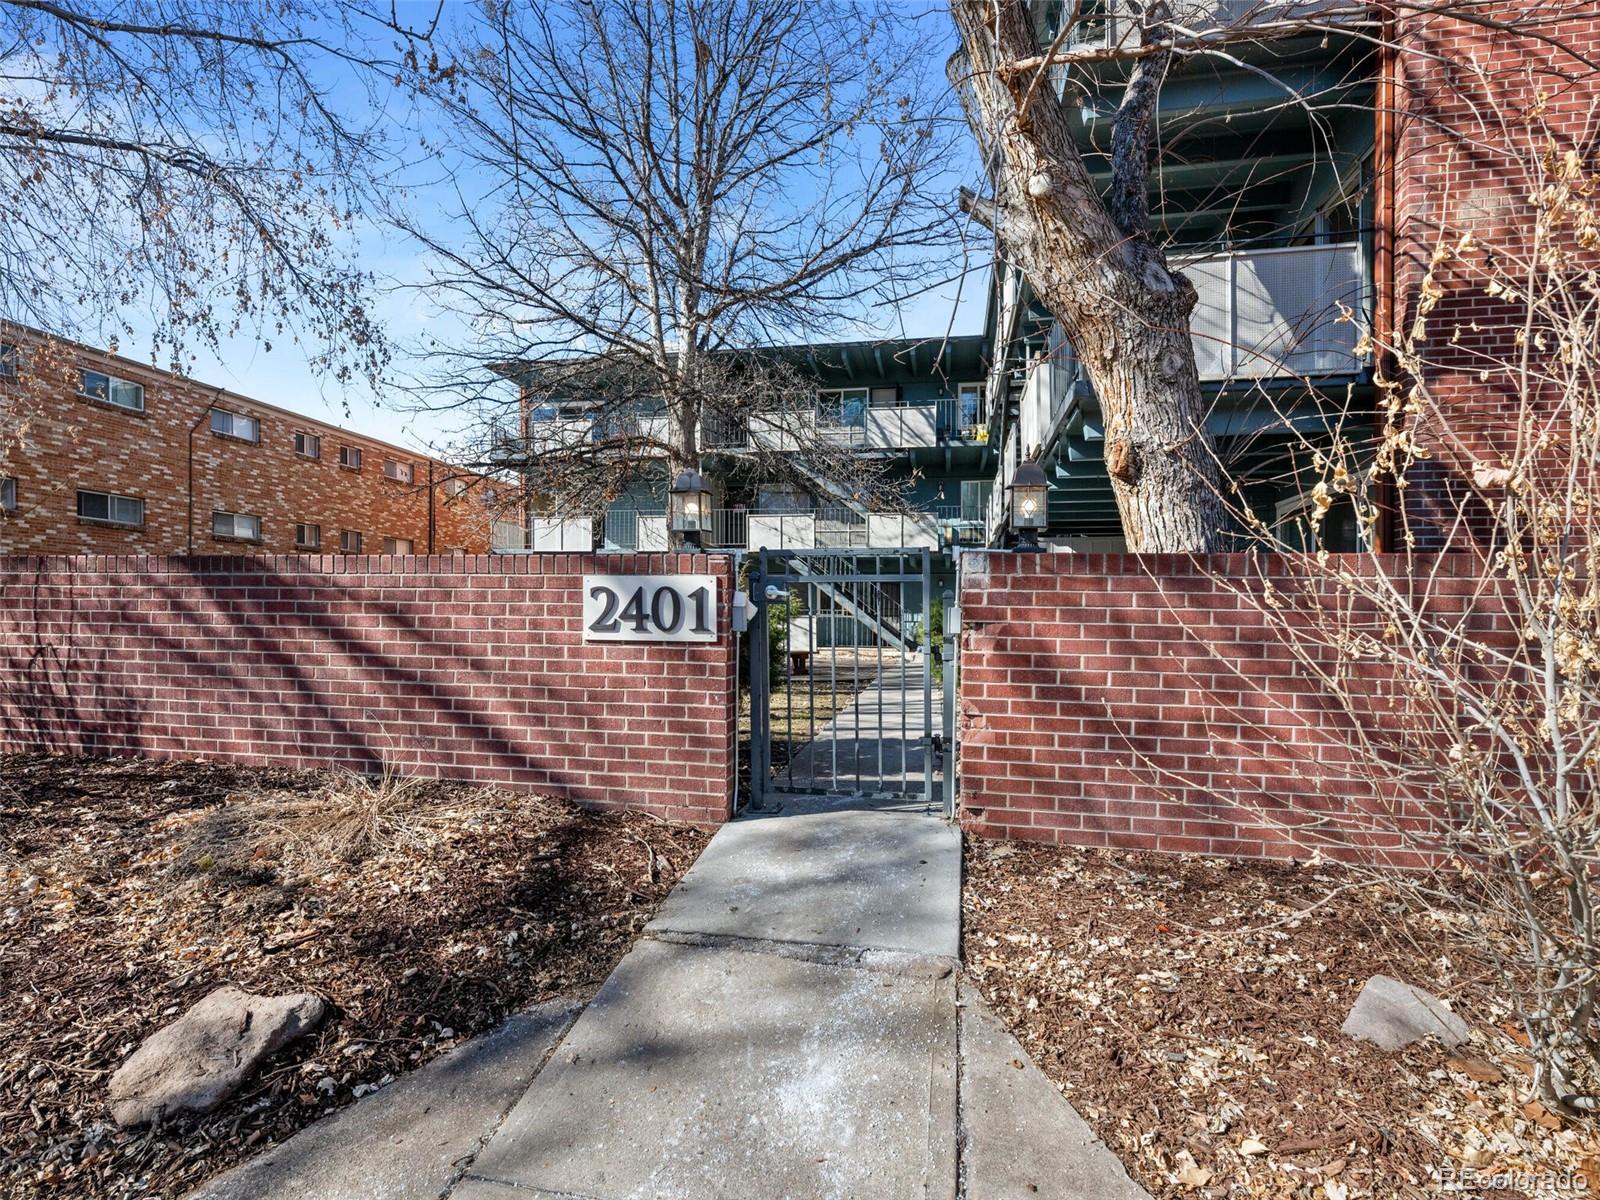 Report Image for 2401 S Gaylord Street,Denver, Colorado